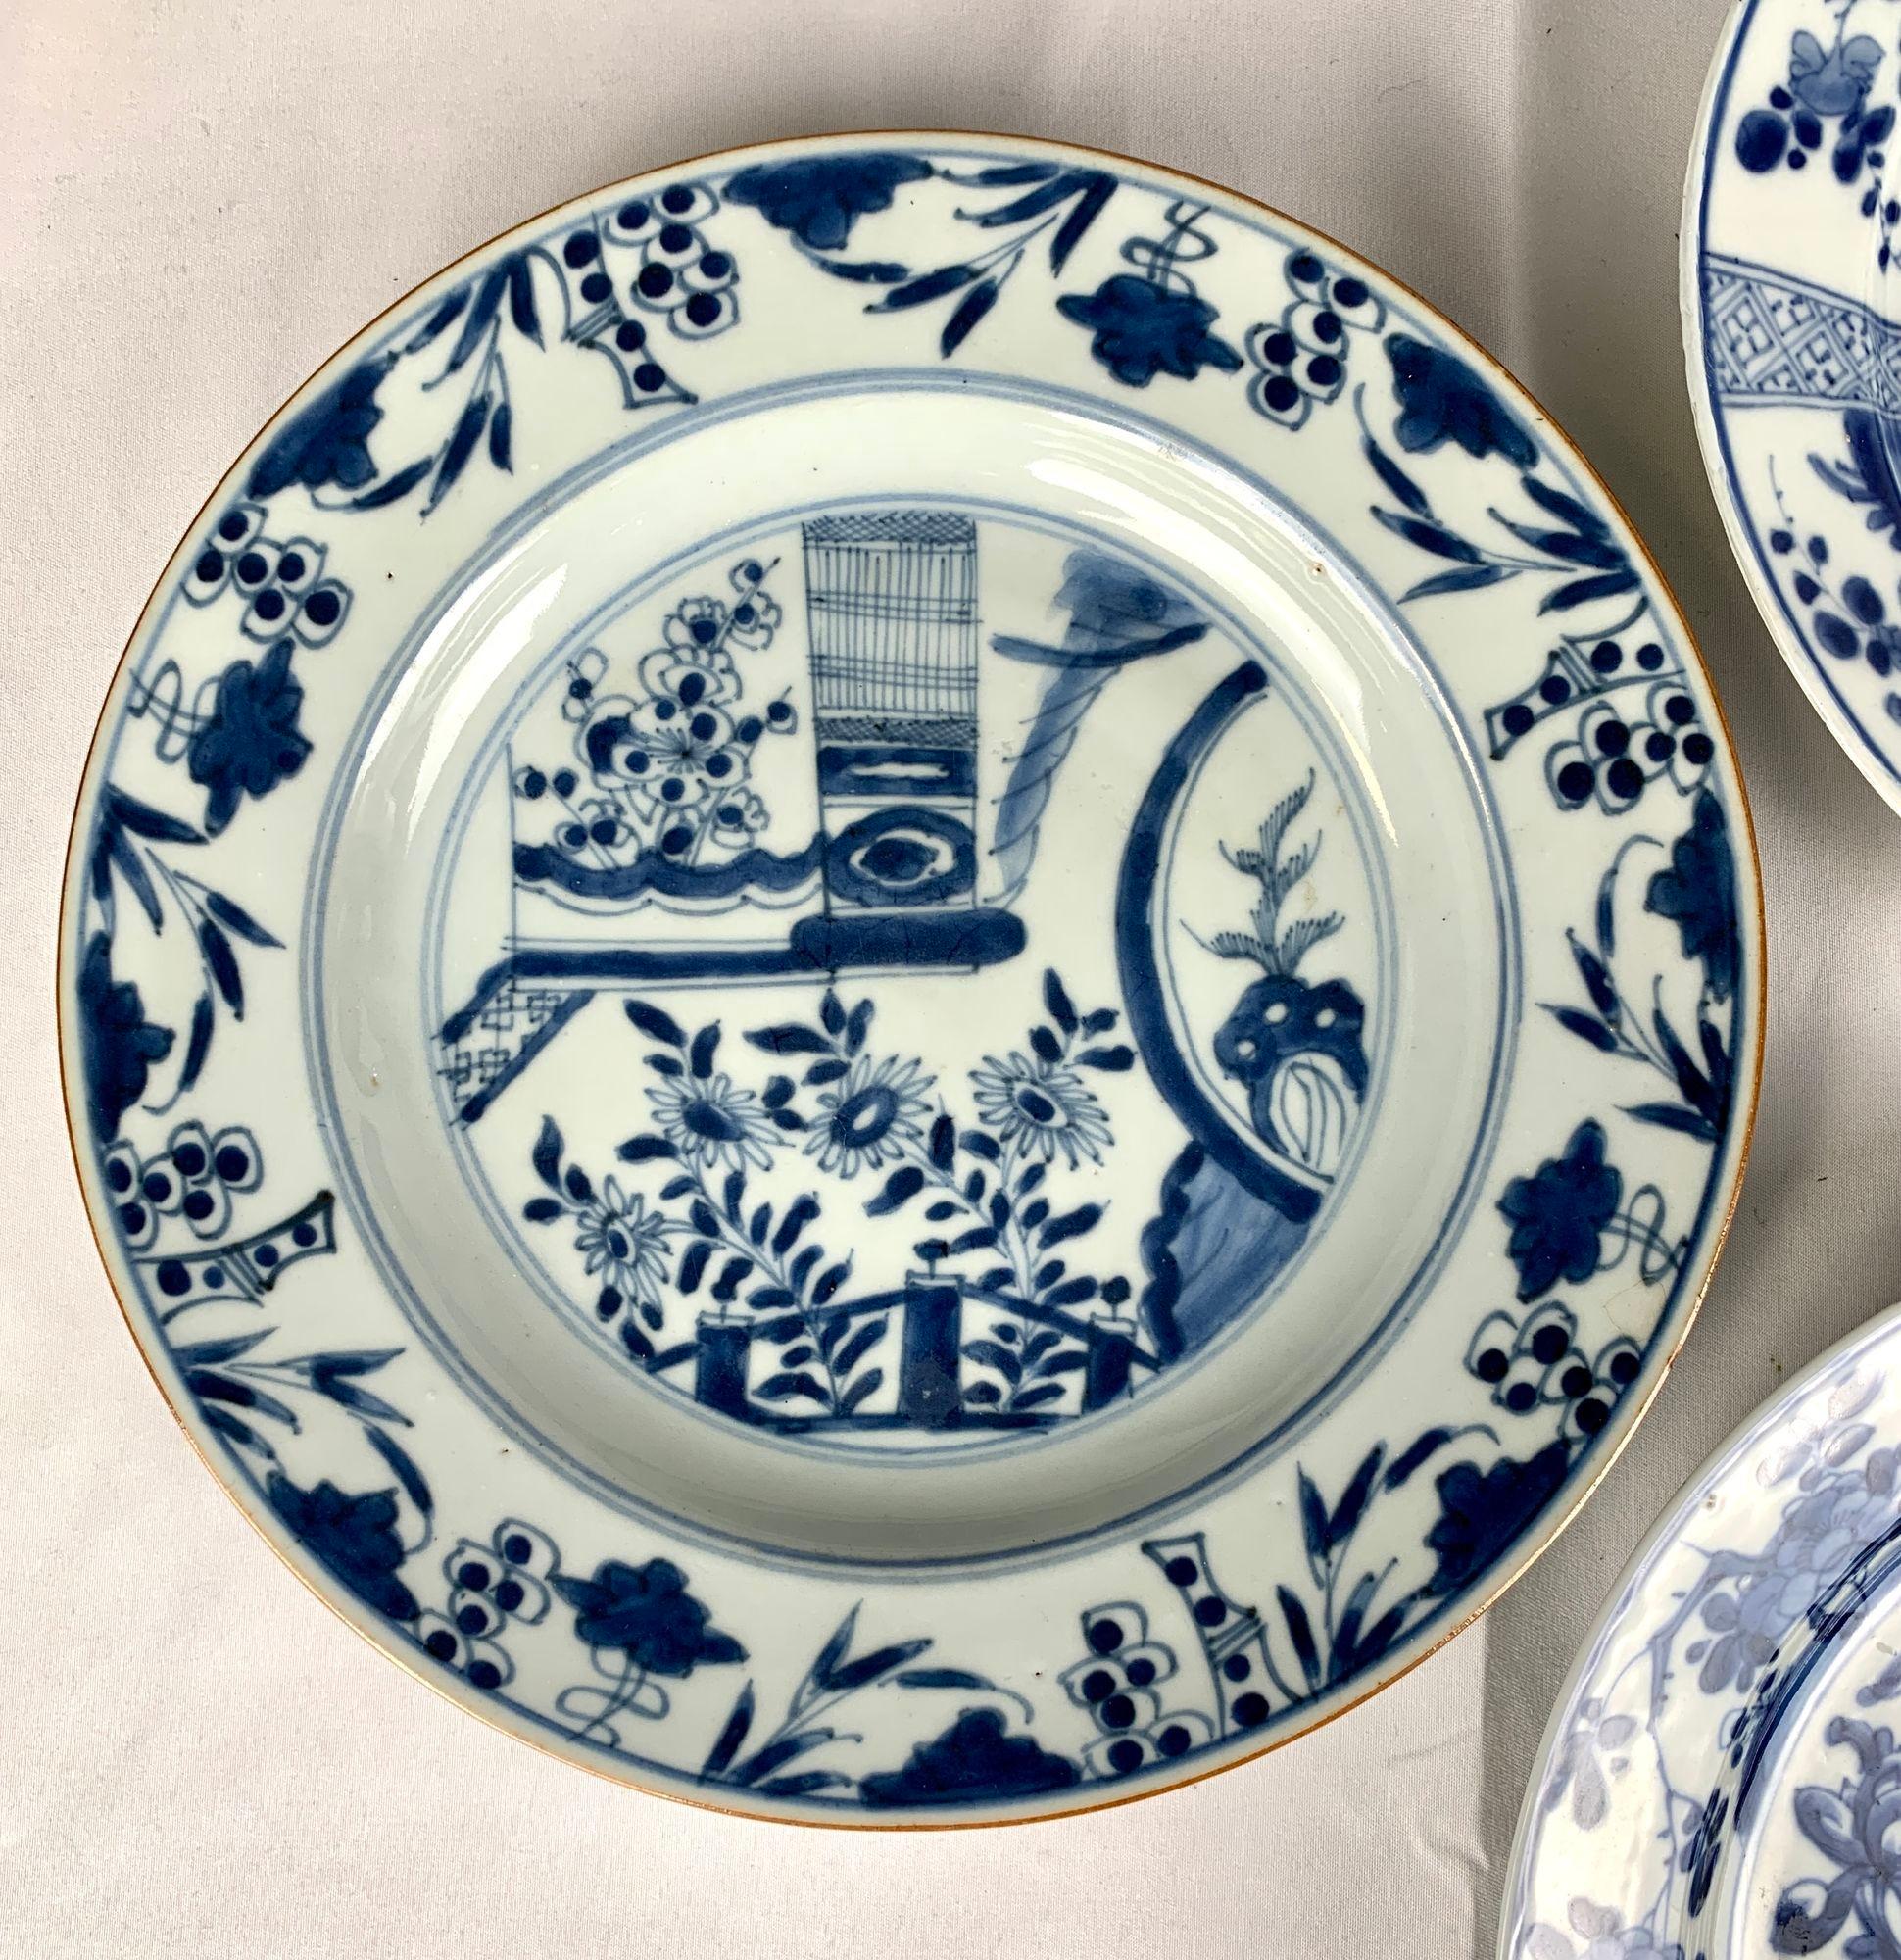 Made in the Qianlong Era circa 1770, these remarkable Chinese blue and white porcelain dishes were hand painted in an exquisite combination of soft and deep cobalt blues.
The pure white porcelain base is covered with a glaze of a slightly blueish